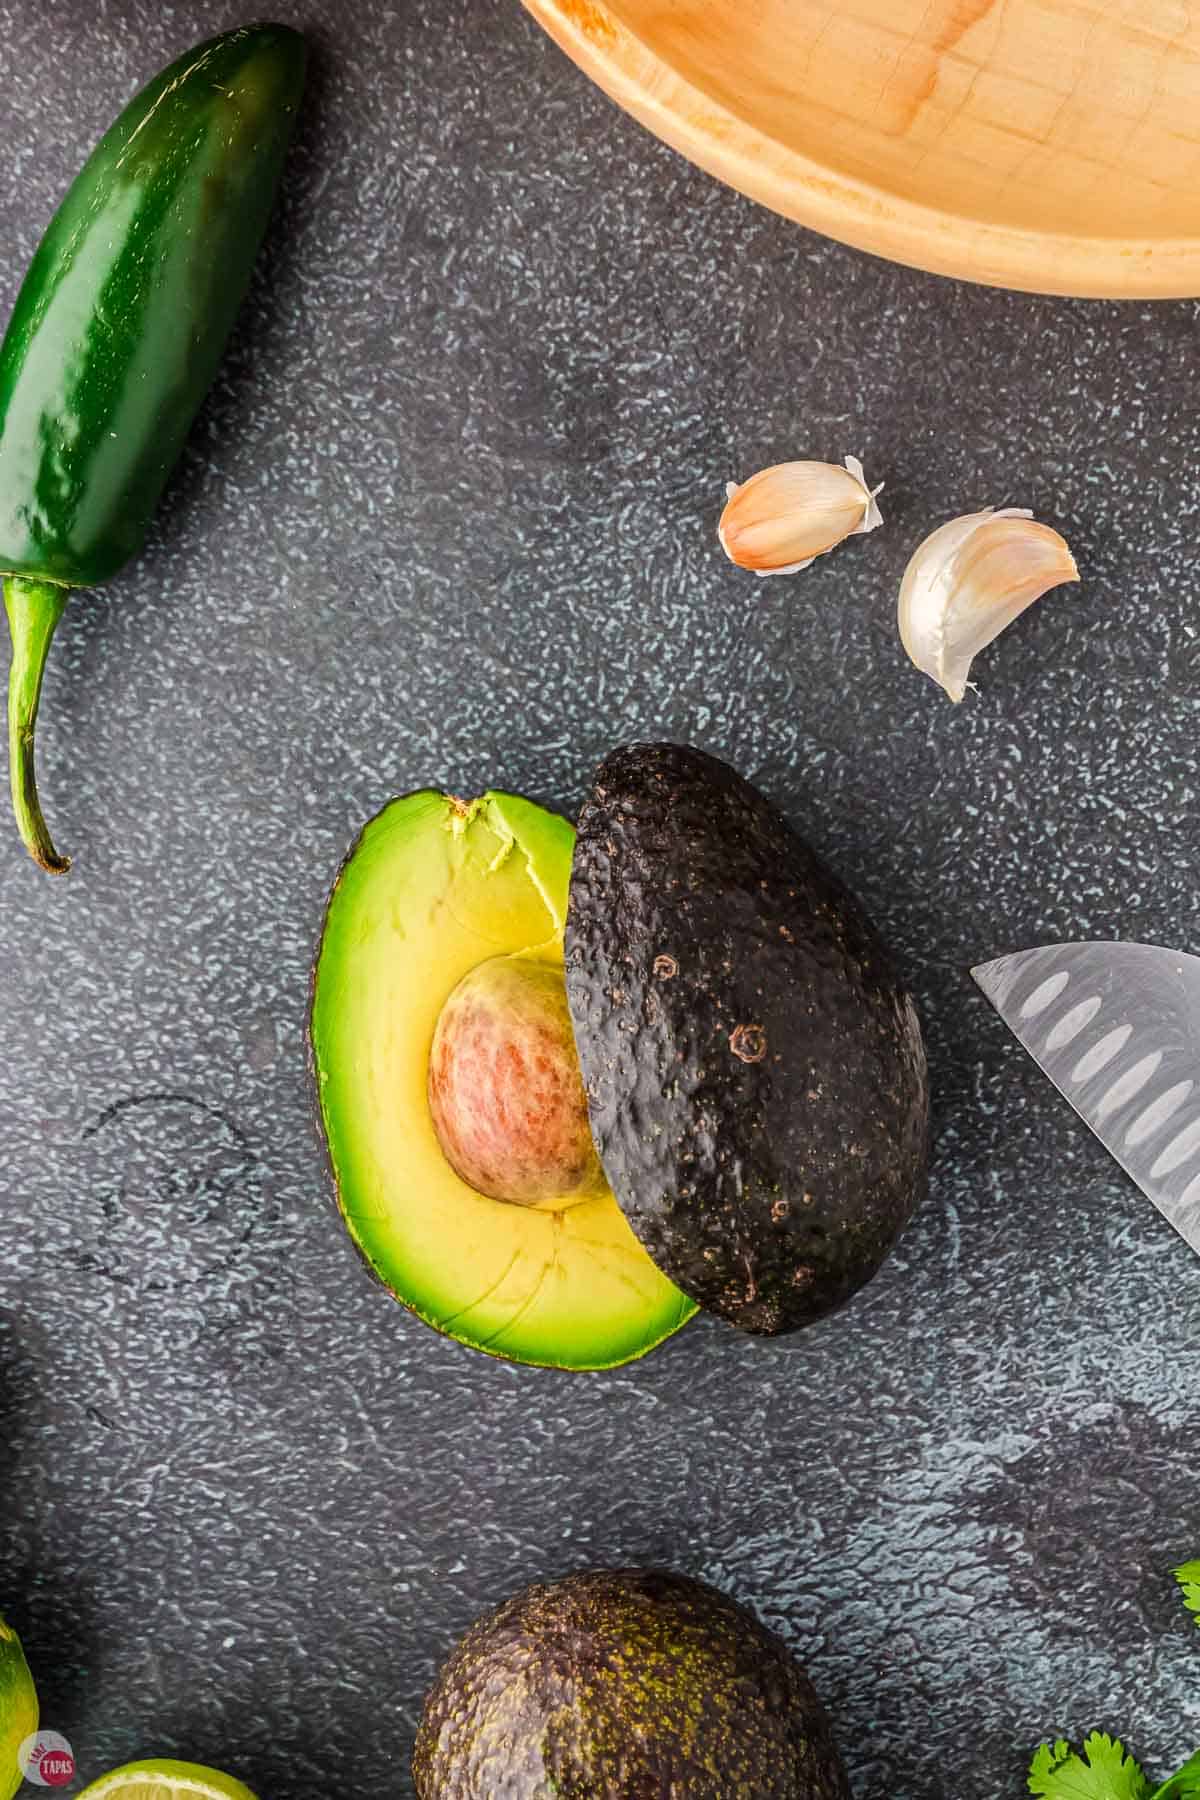 the best guacamole starts with ripe avocados